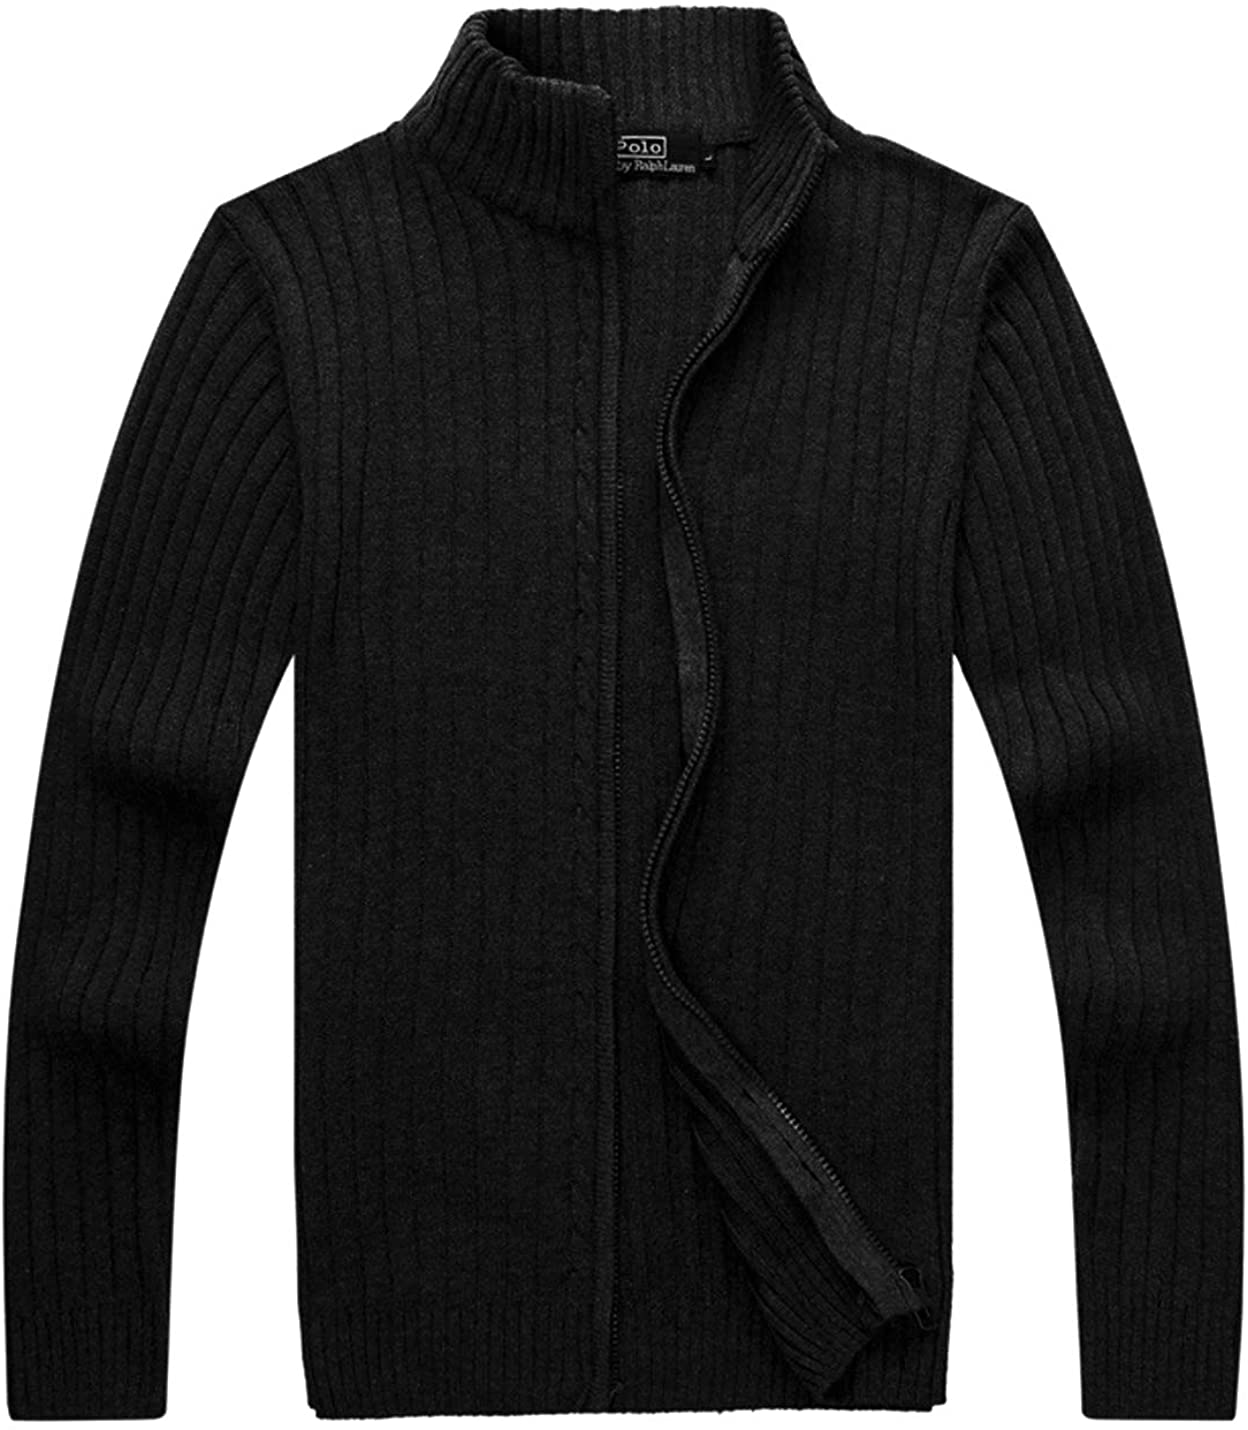 Yeokou Mens Casual Autumn Stand Collar Full Zip Up Knitted Cardigan Sweater 